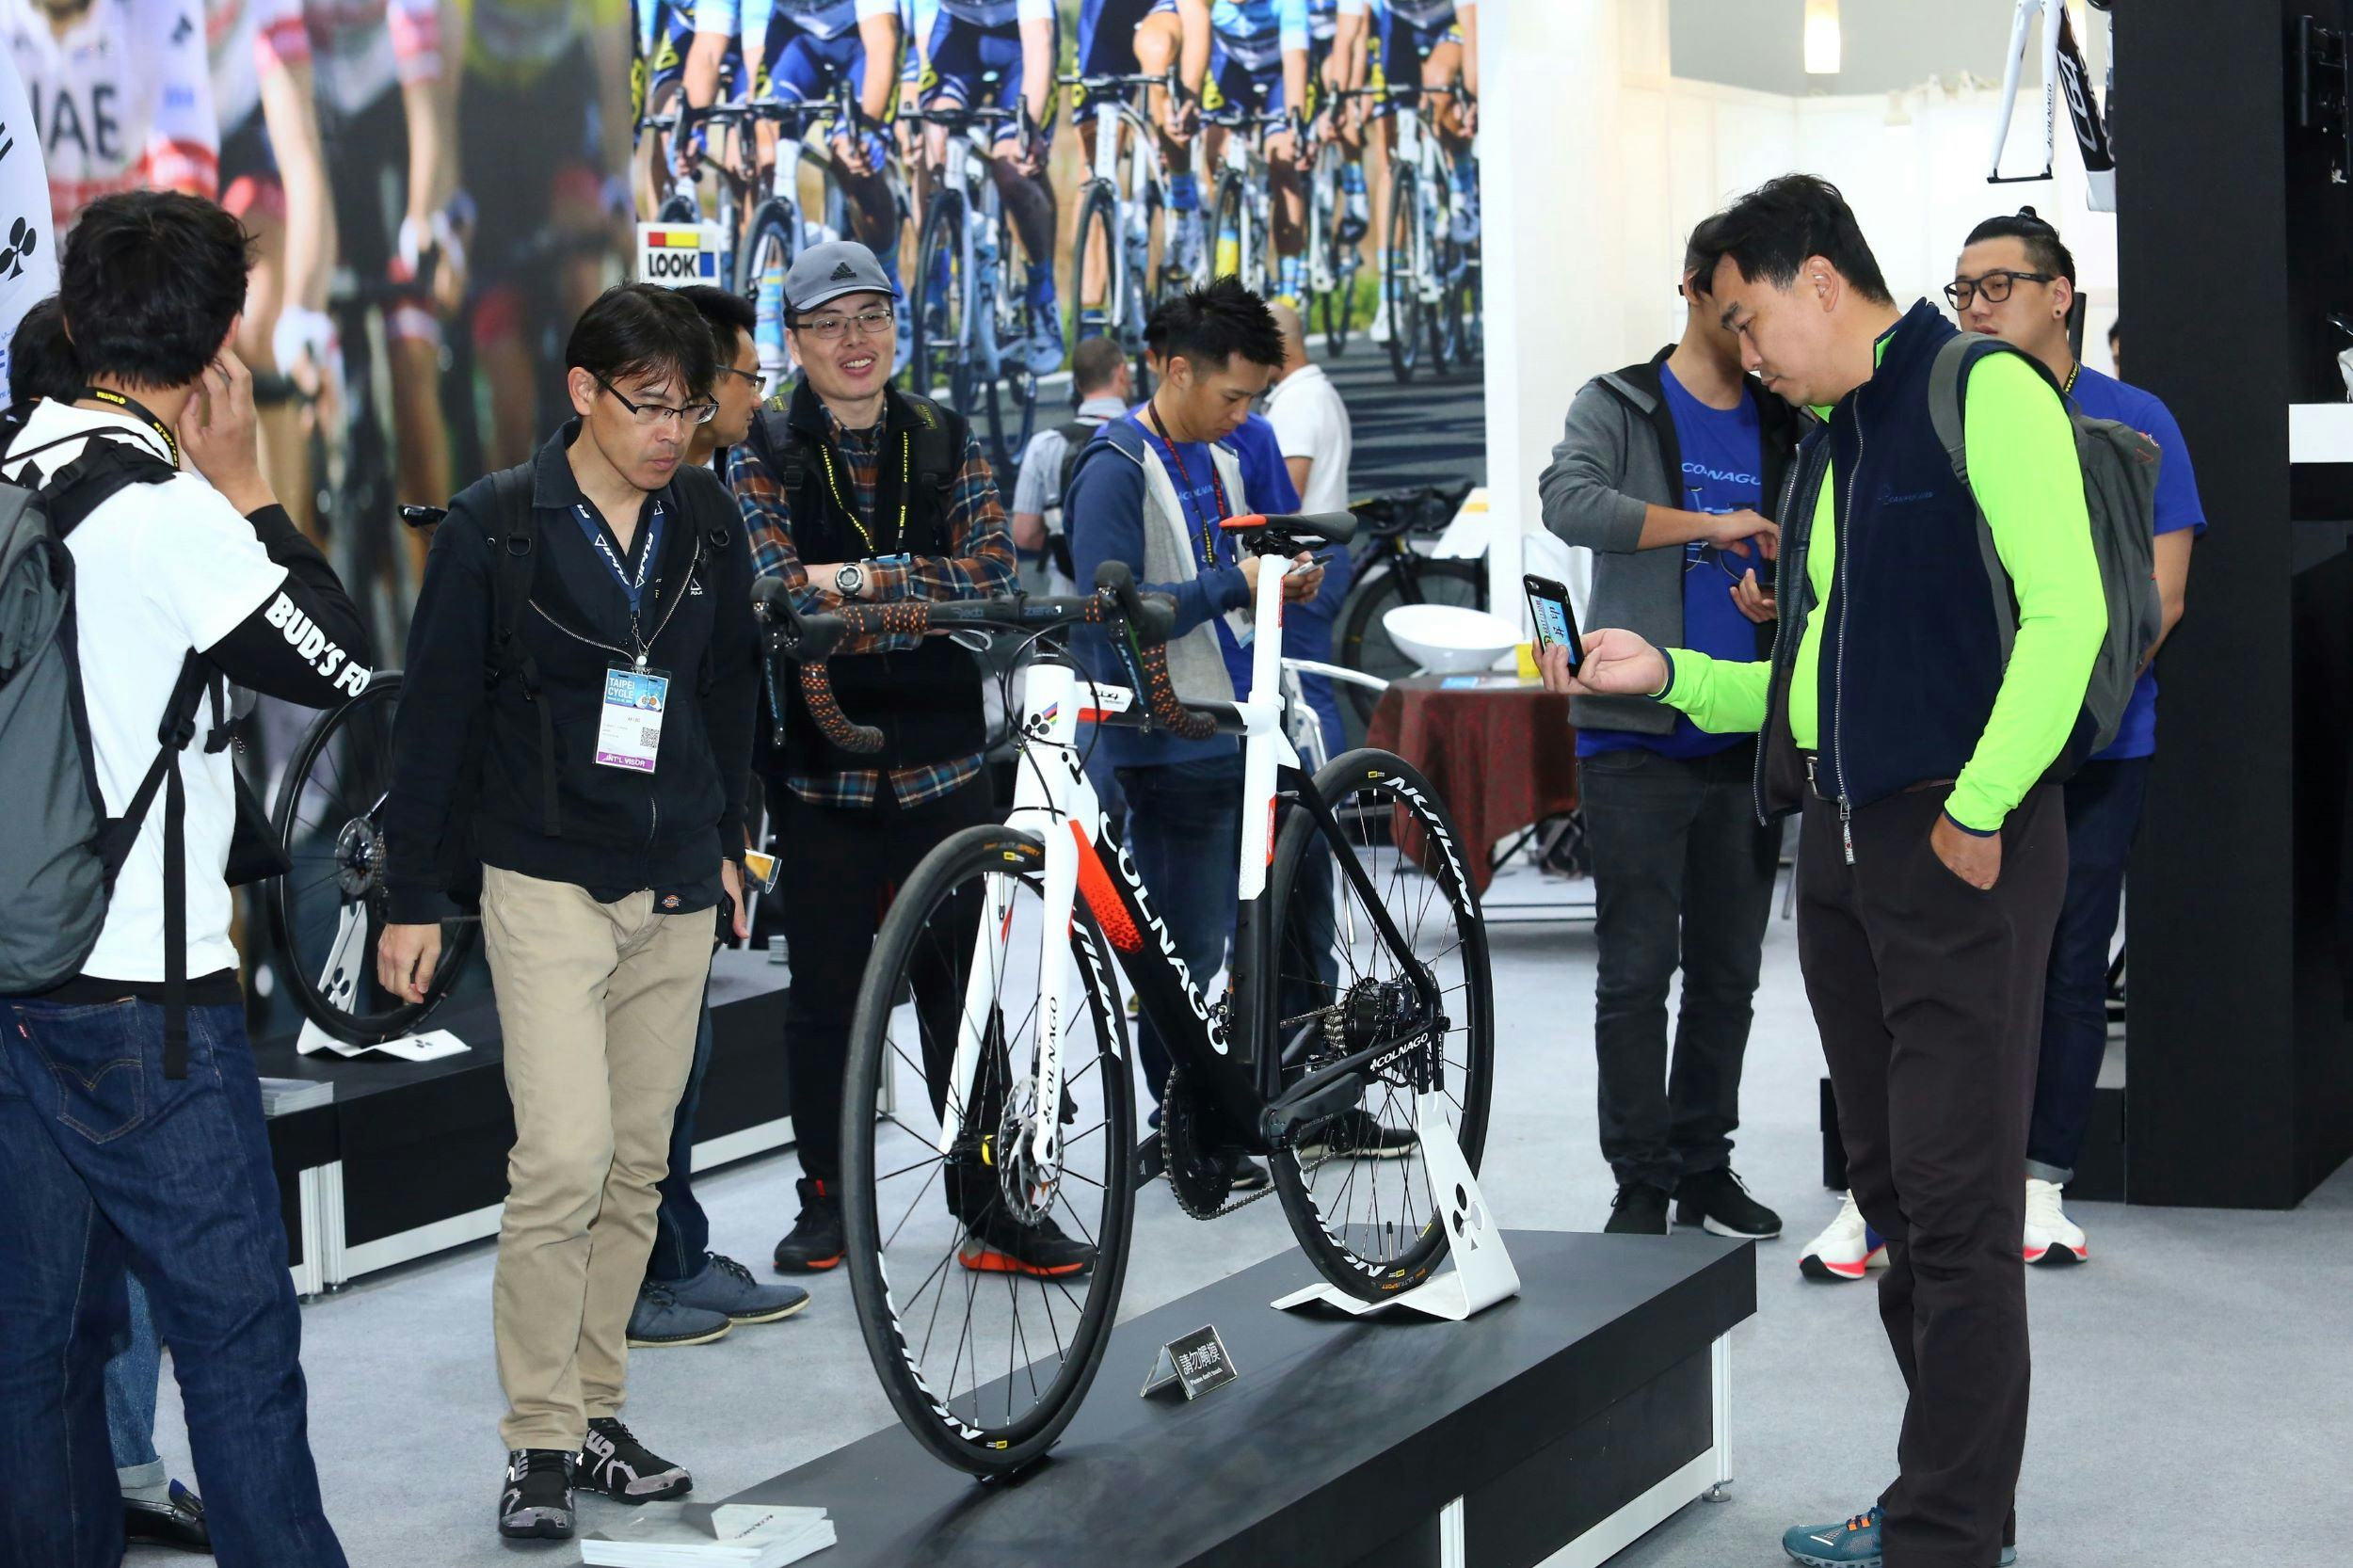 The Taipei Cycle d&I award winners will announced during the event next March. – Photo TAITRA 